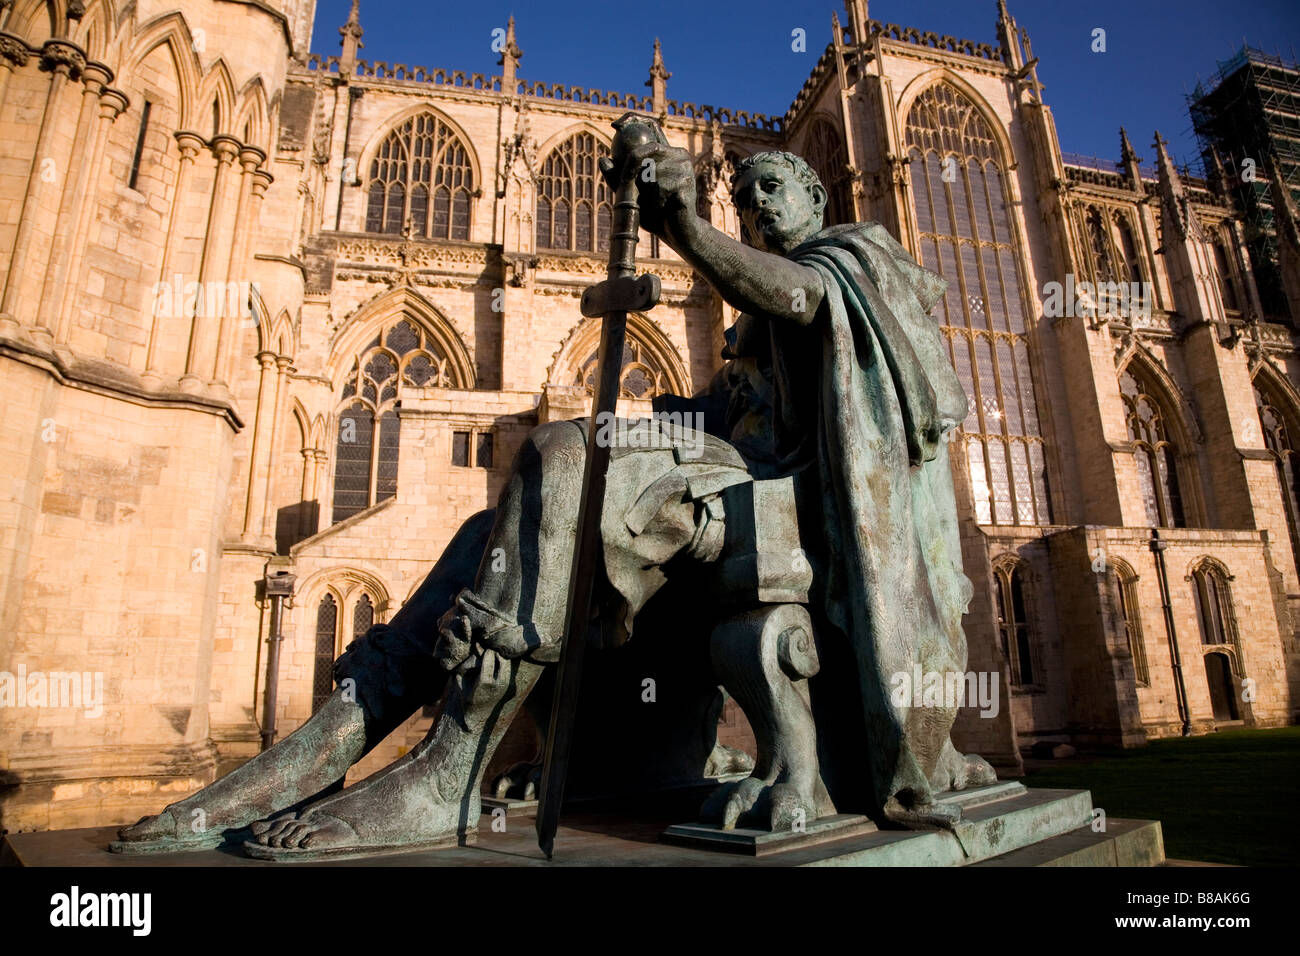 The statue of the Roman Emperor Constantine stands close to York Minster in York, England. Stock Photo